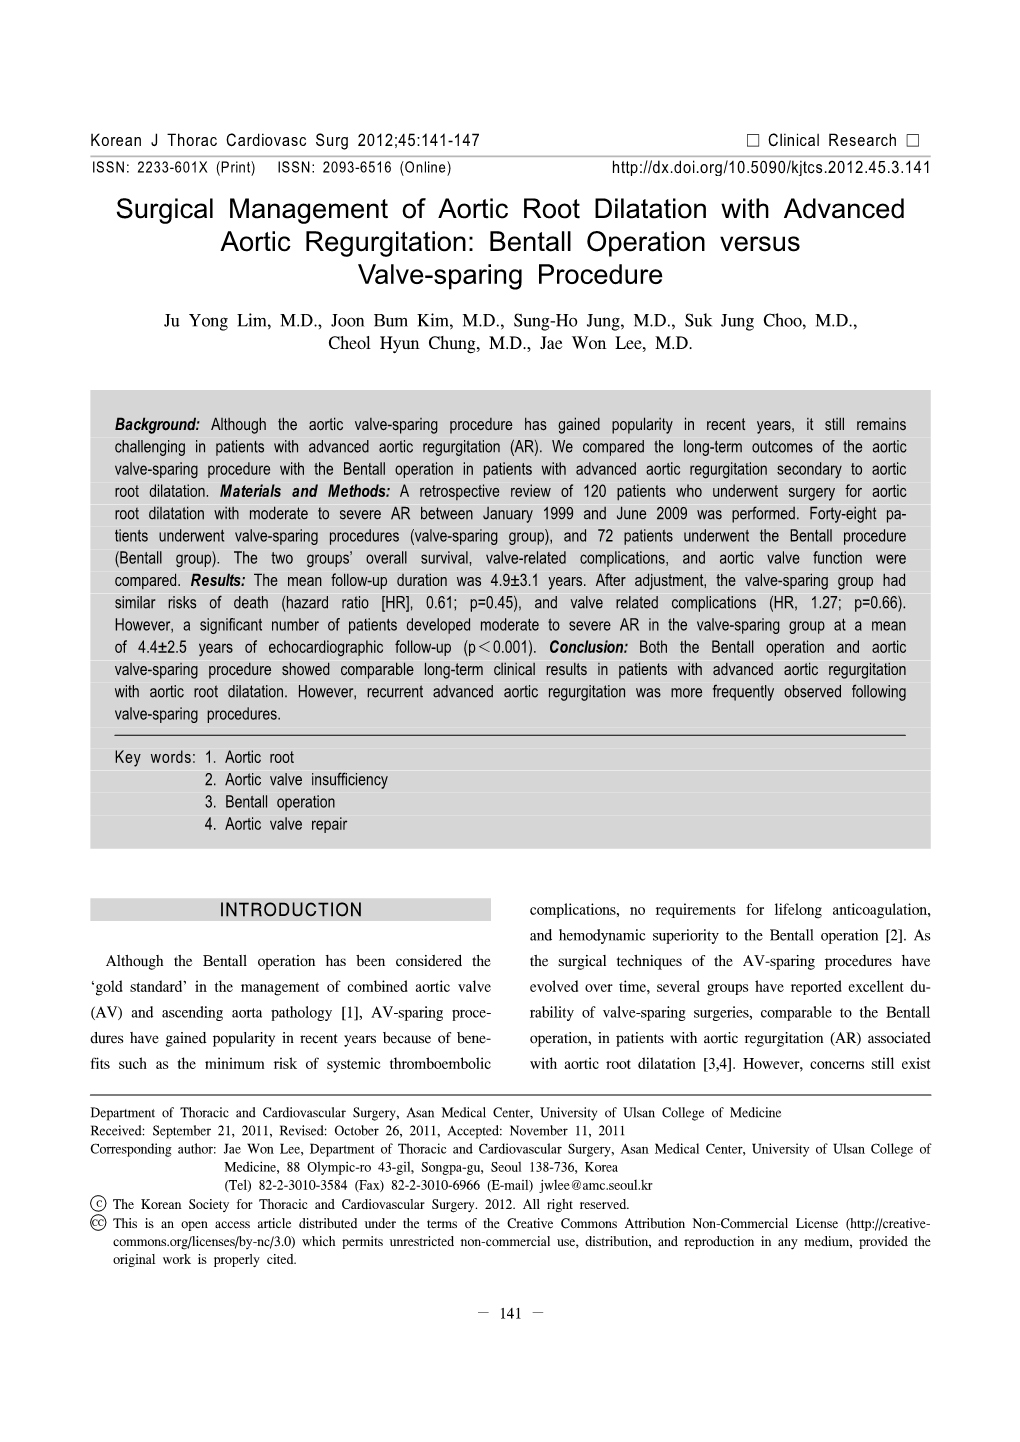 Surgical Management of Aortic Root Dilatation with Advanced Aortic Regurgitation: Bentall Operation Versus Valve-Sparing Procedure